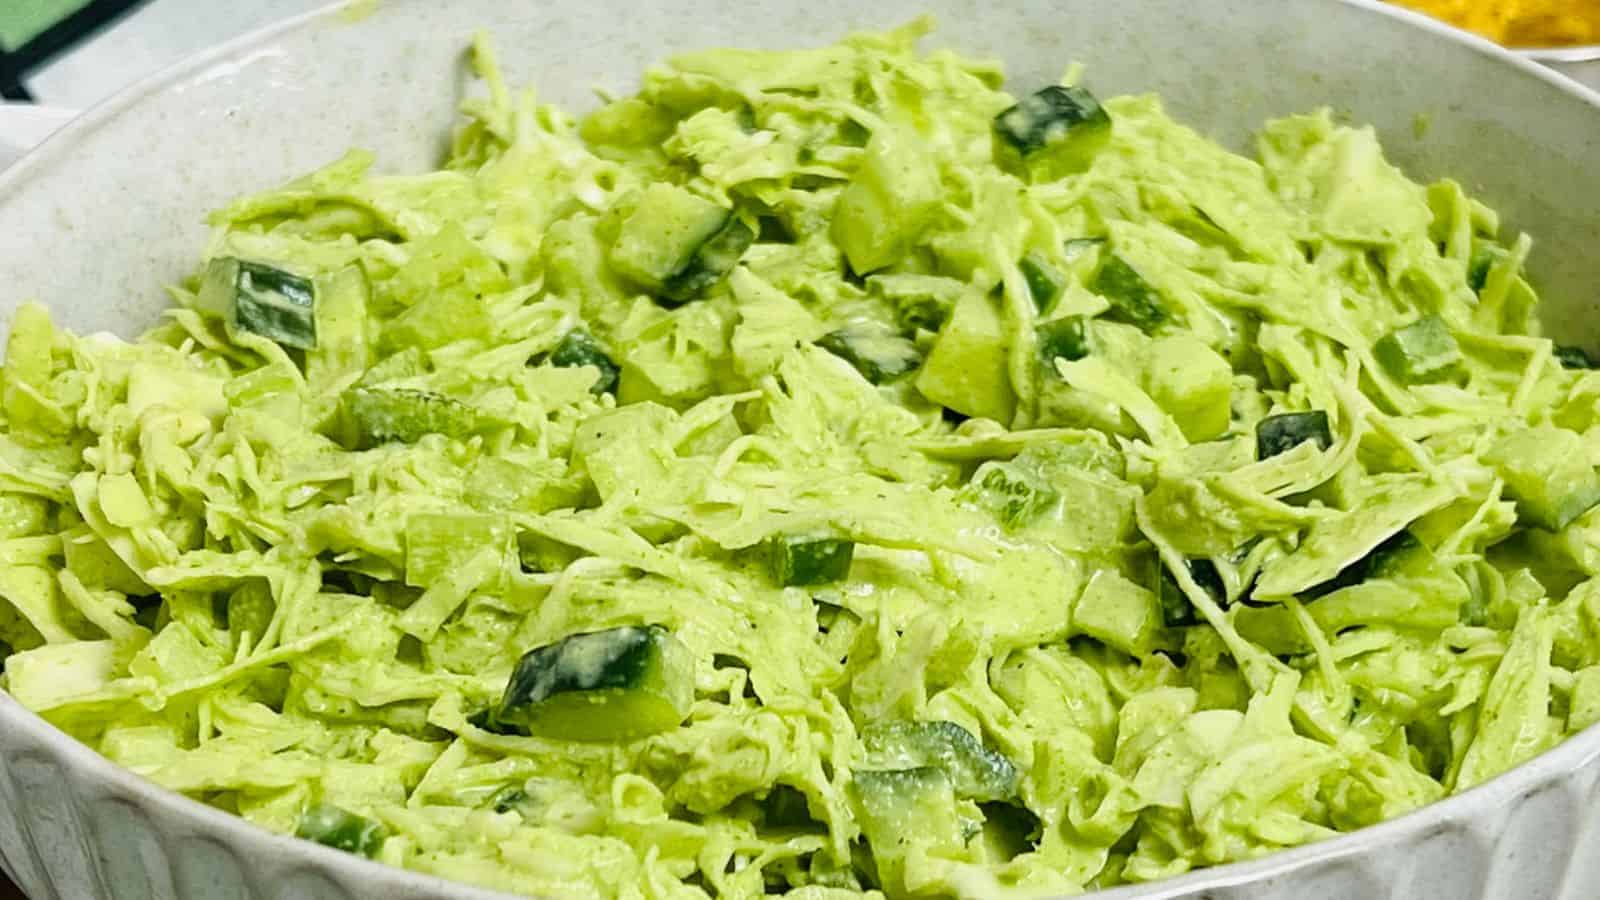 Cabbage salad in a white bowl with chips in the background.